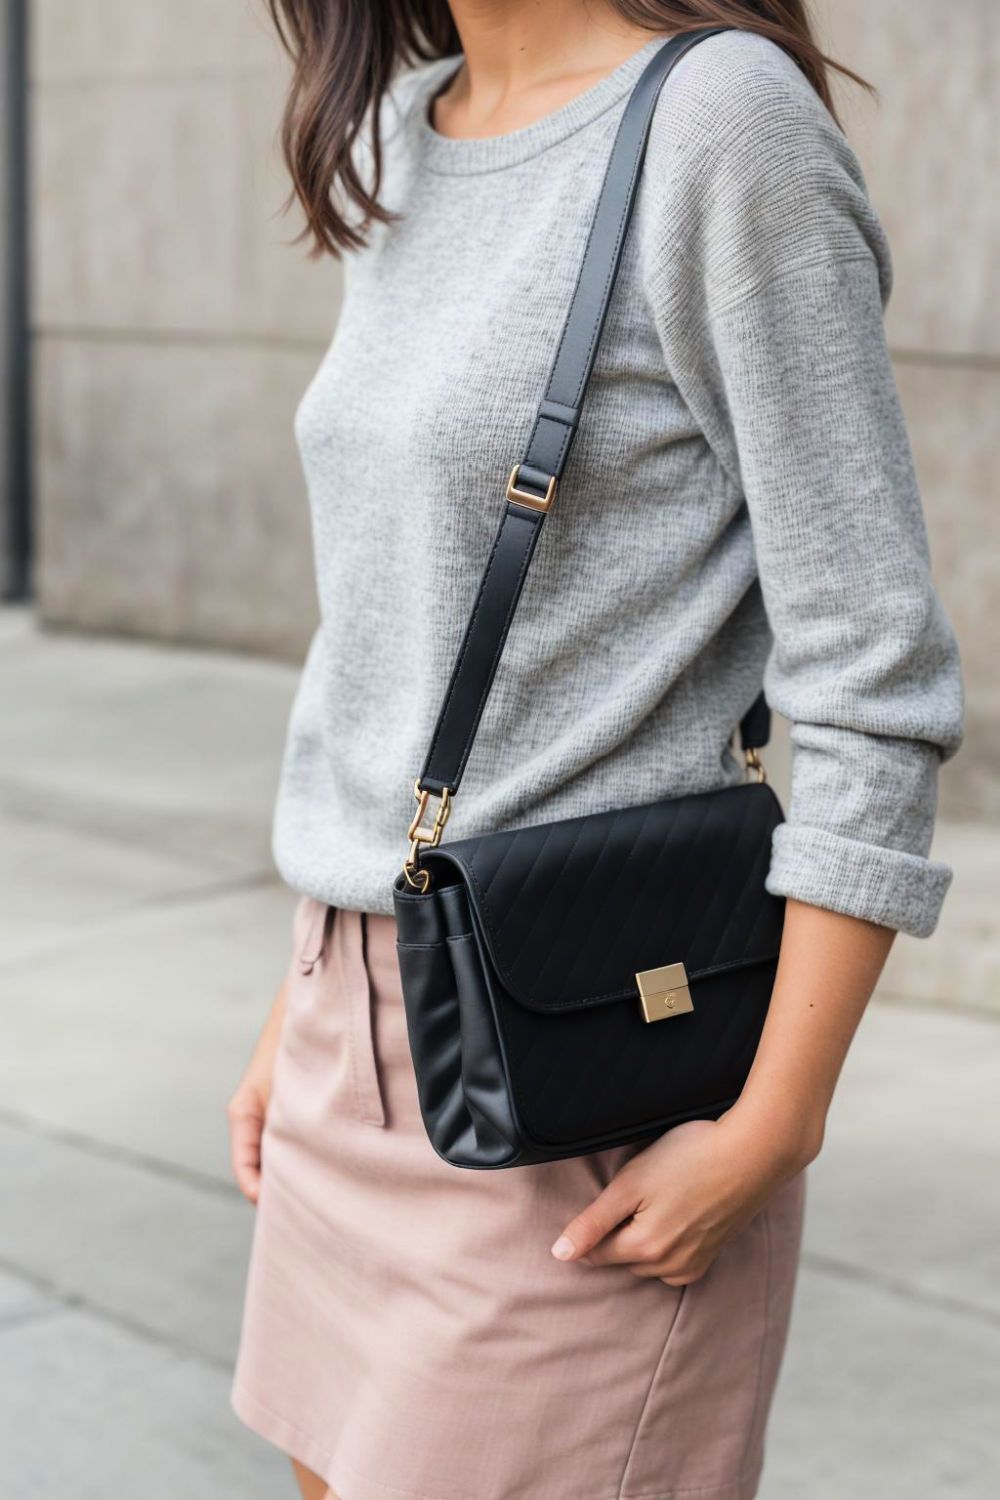 crossbody bags for every spring outfit and occasion